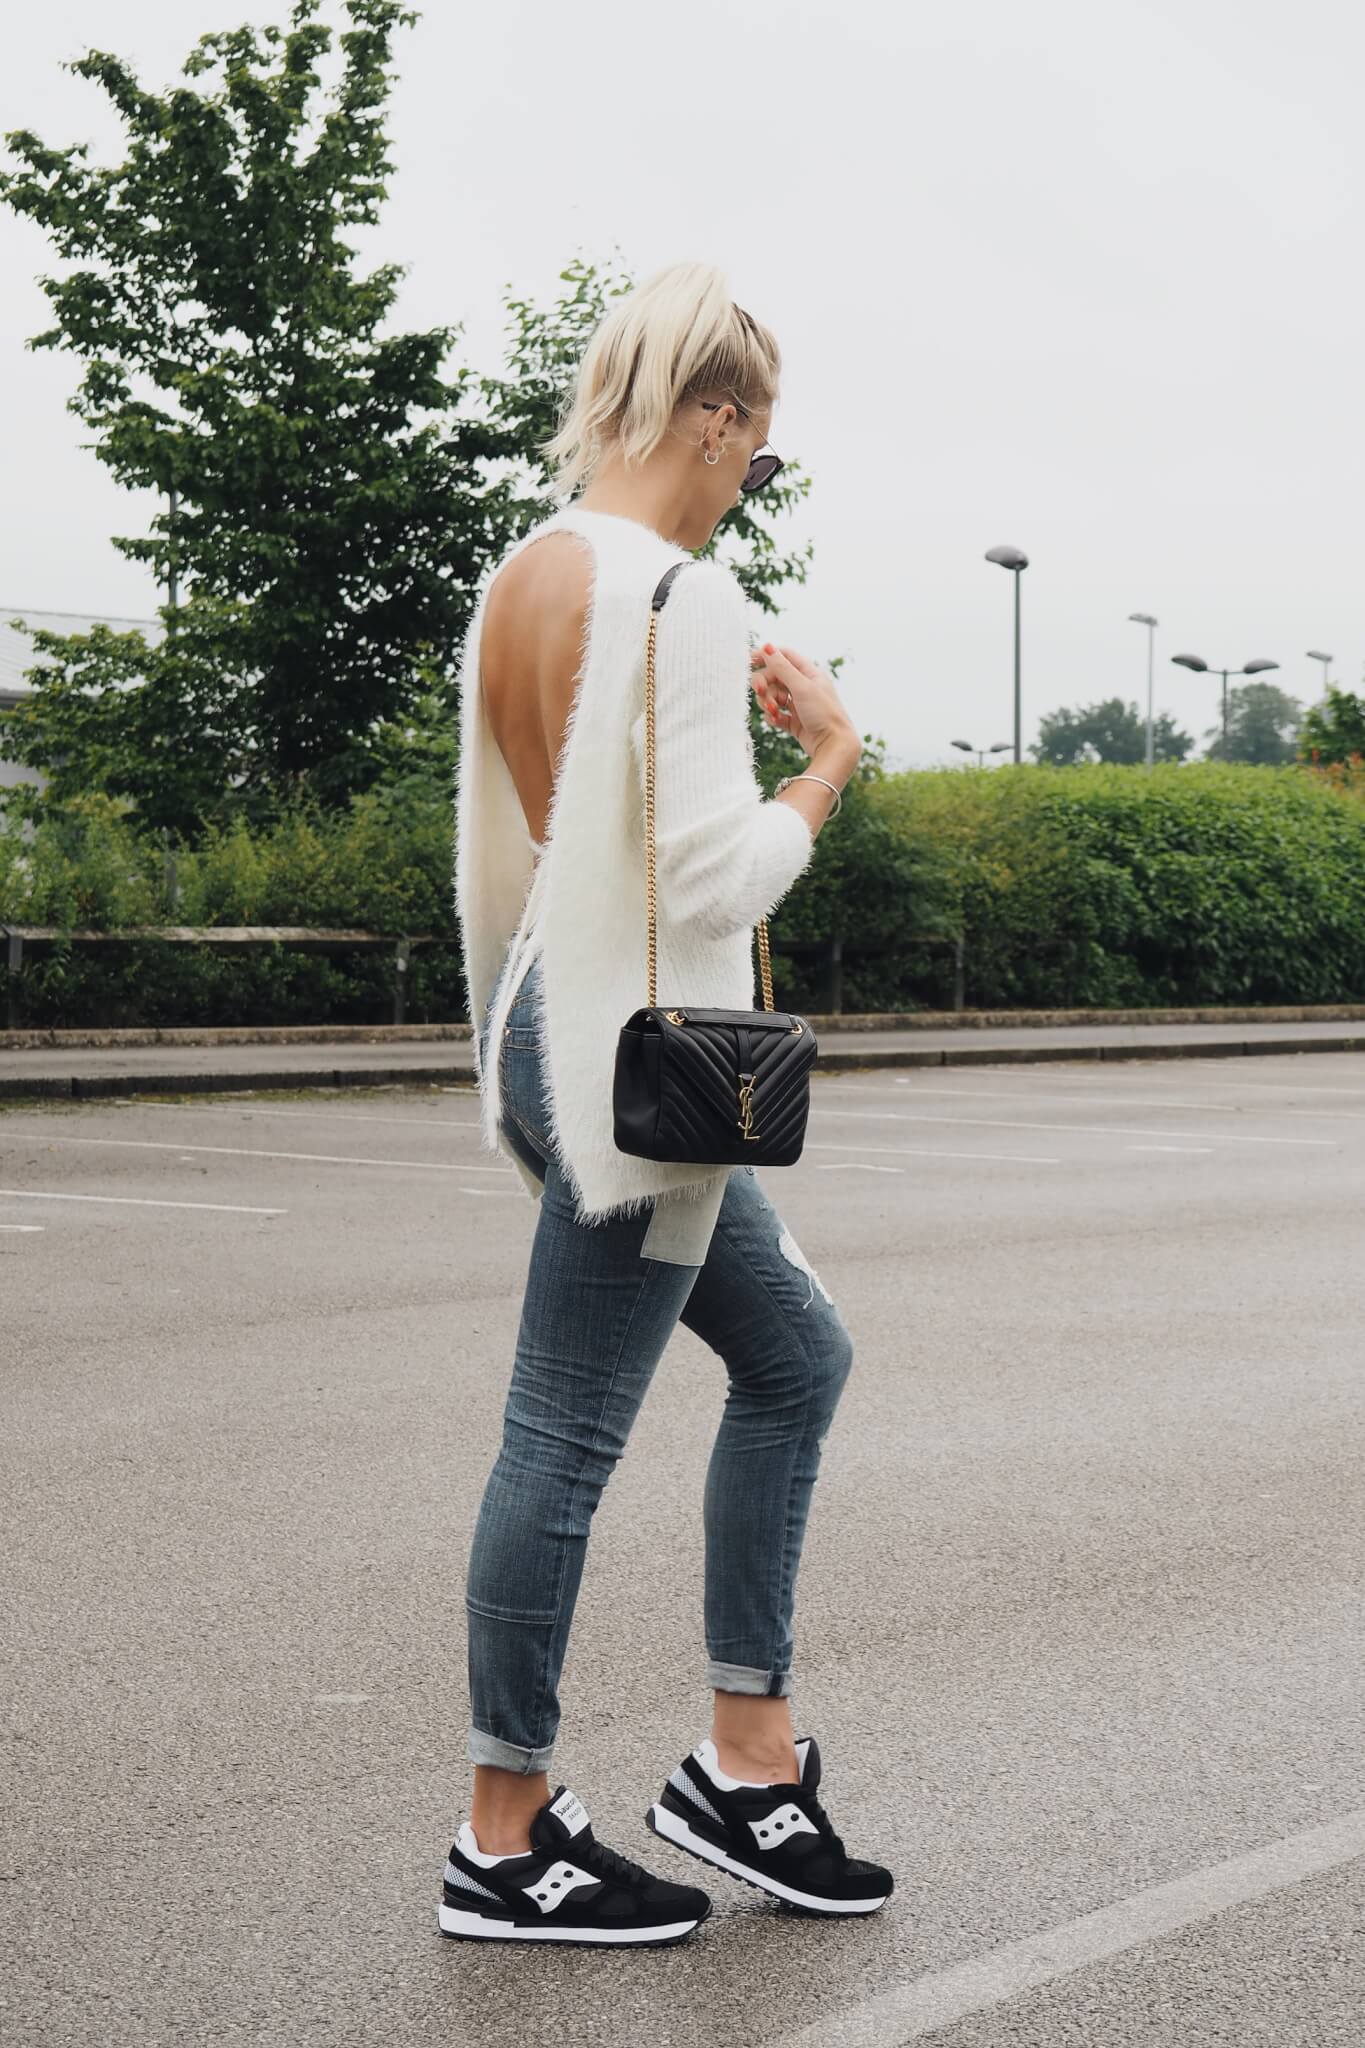 The Backless Sweater You Need This Autumn - UK STYLE BLOG